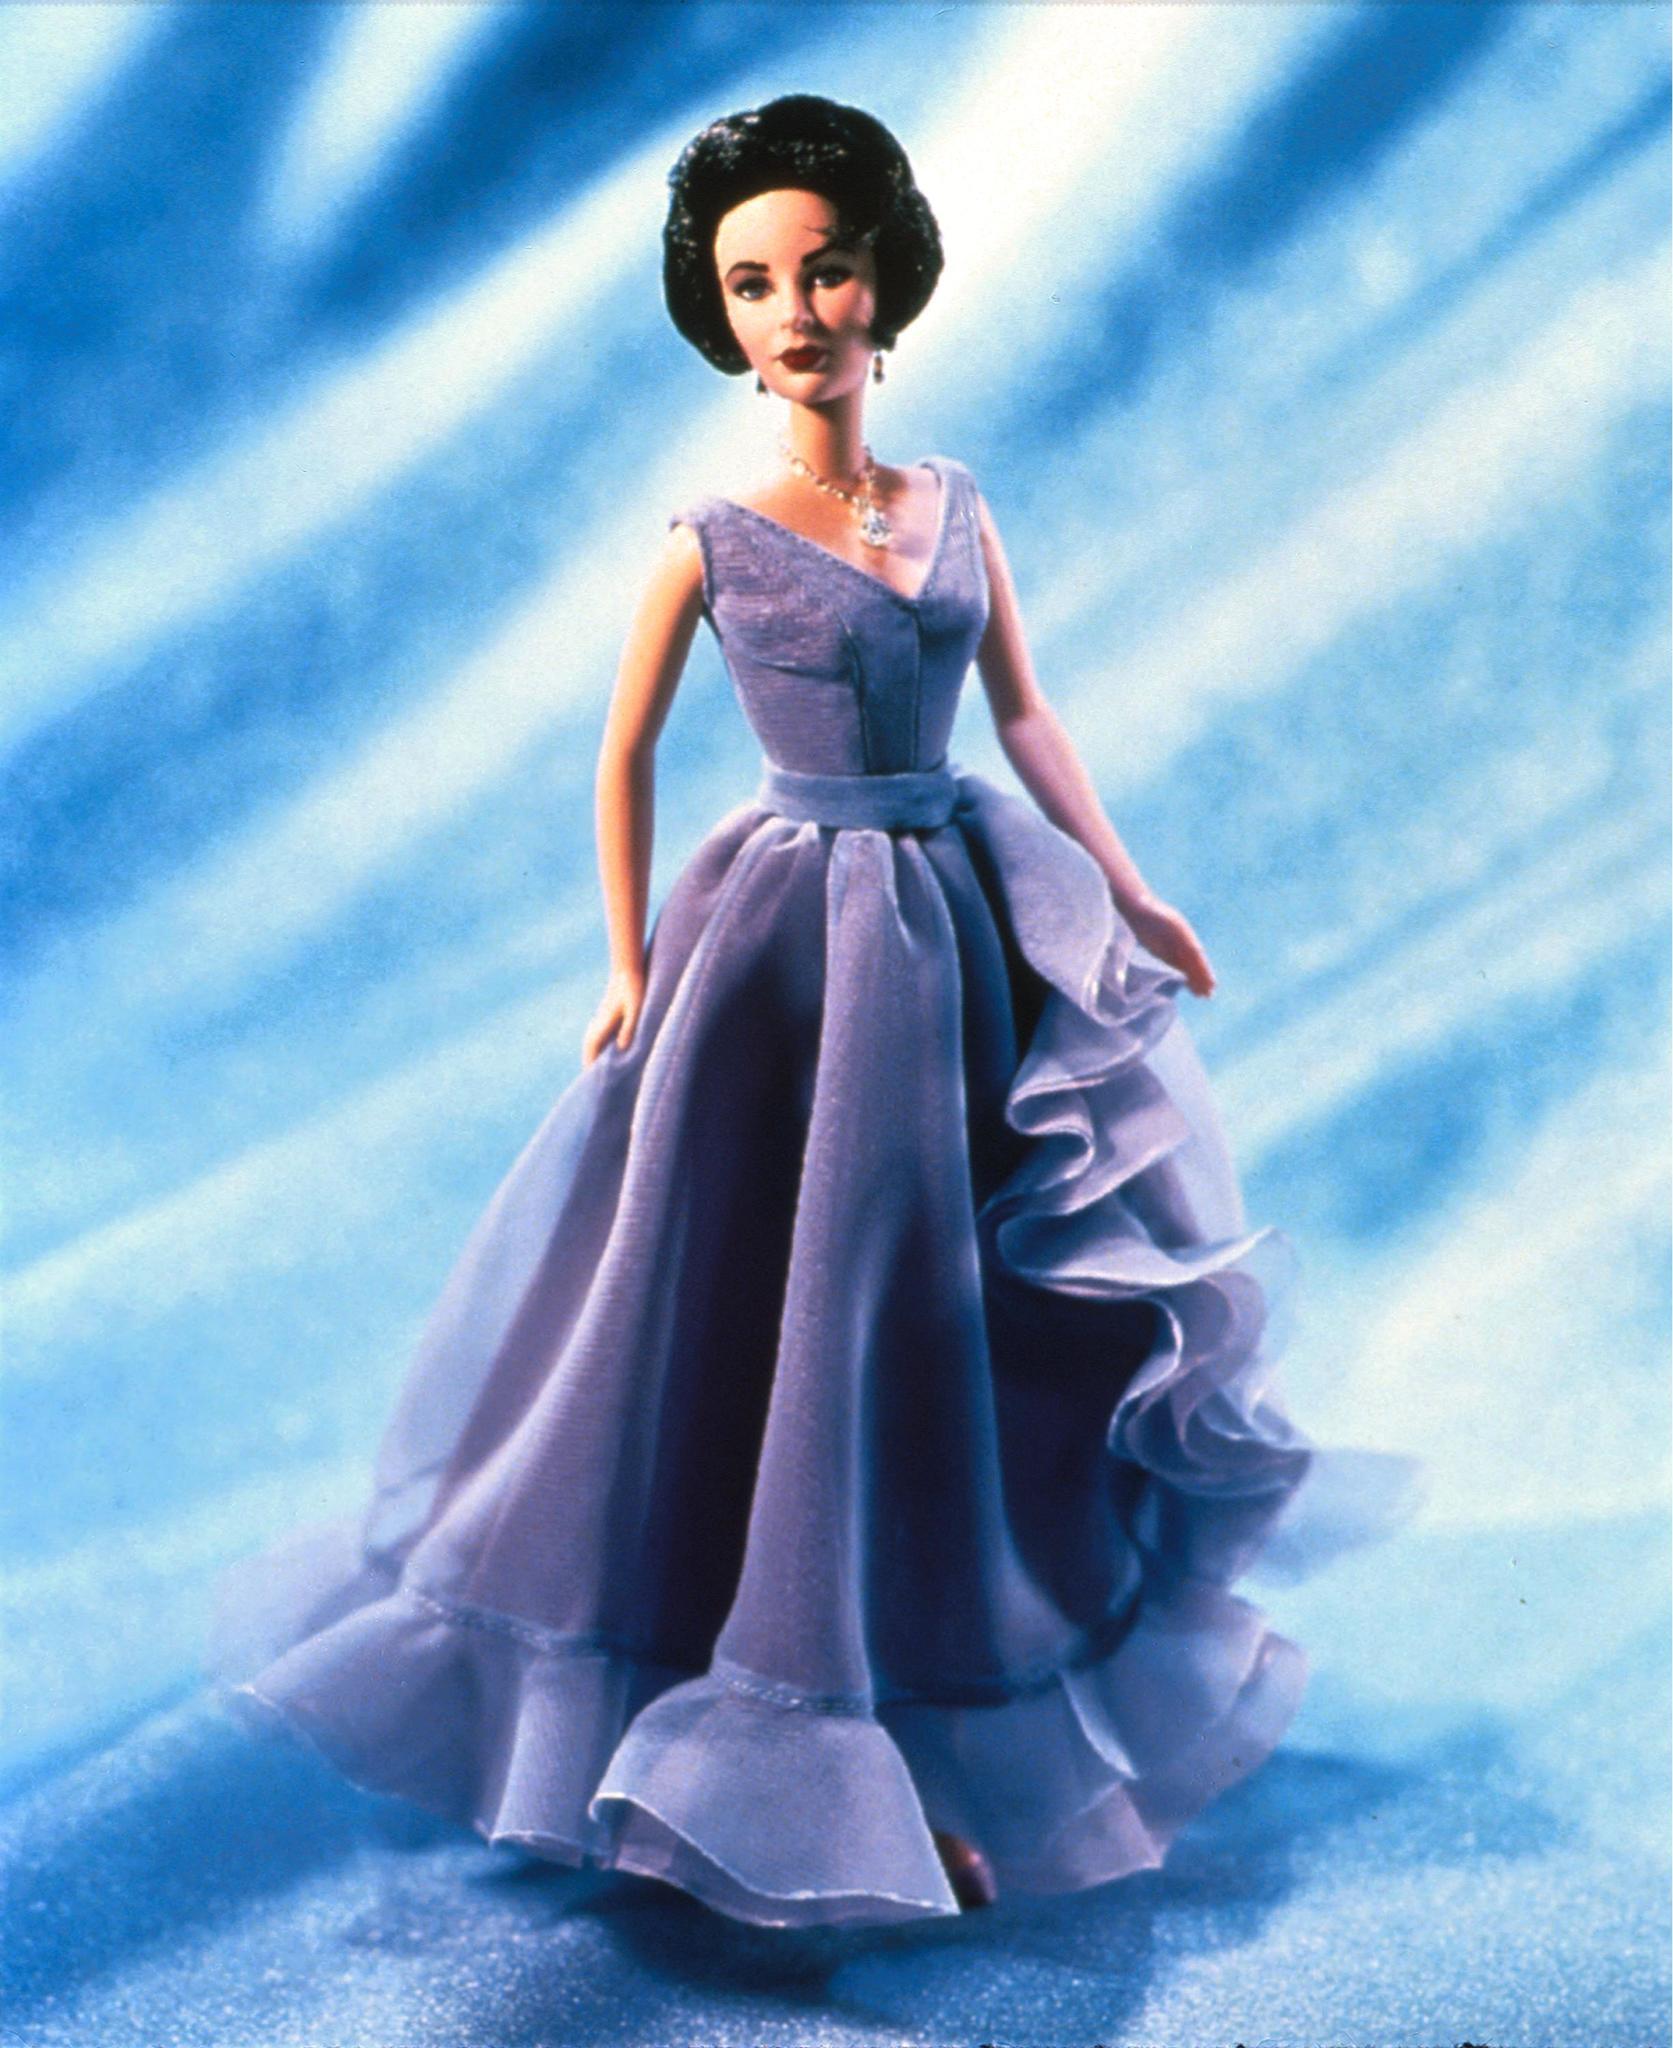 A Barbie doll created in the likeness of actress Elizabeth Taylor was released in fall 2000, a collaboration between the Taylor's White Dimonds fragrance and Mattel.